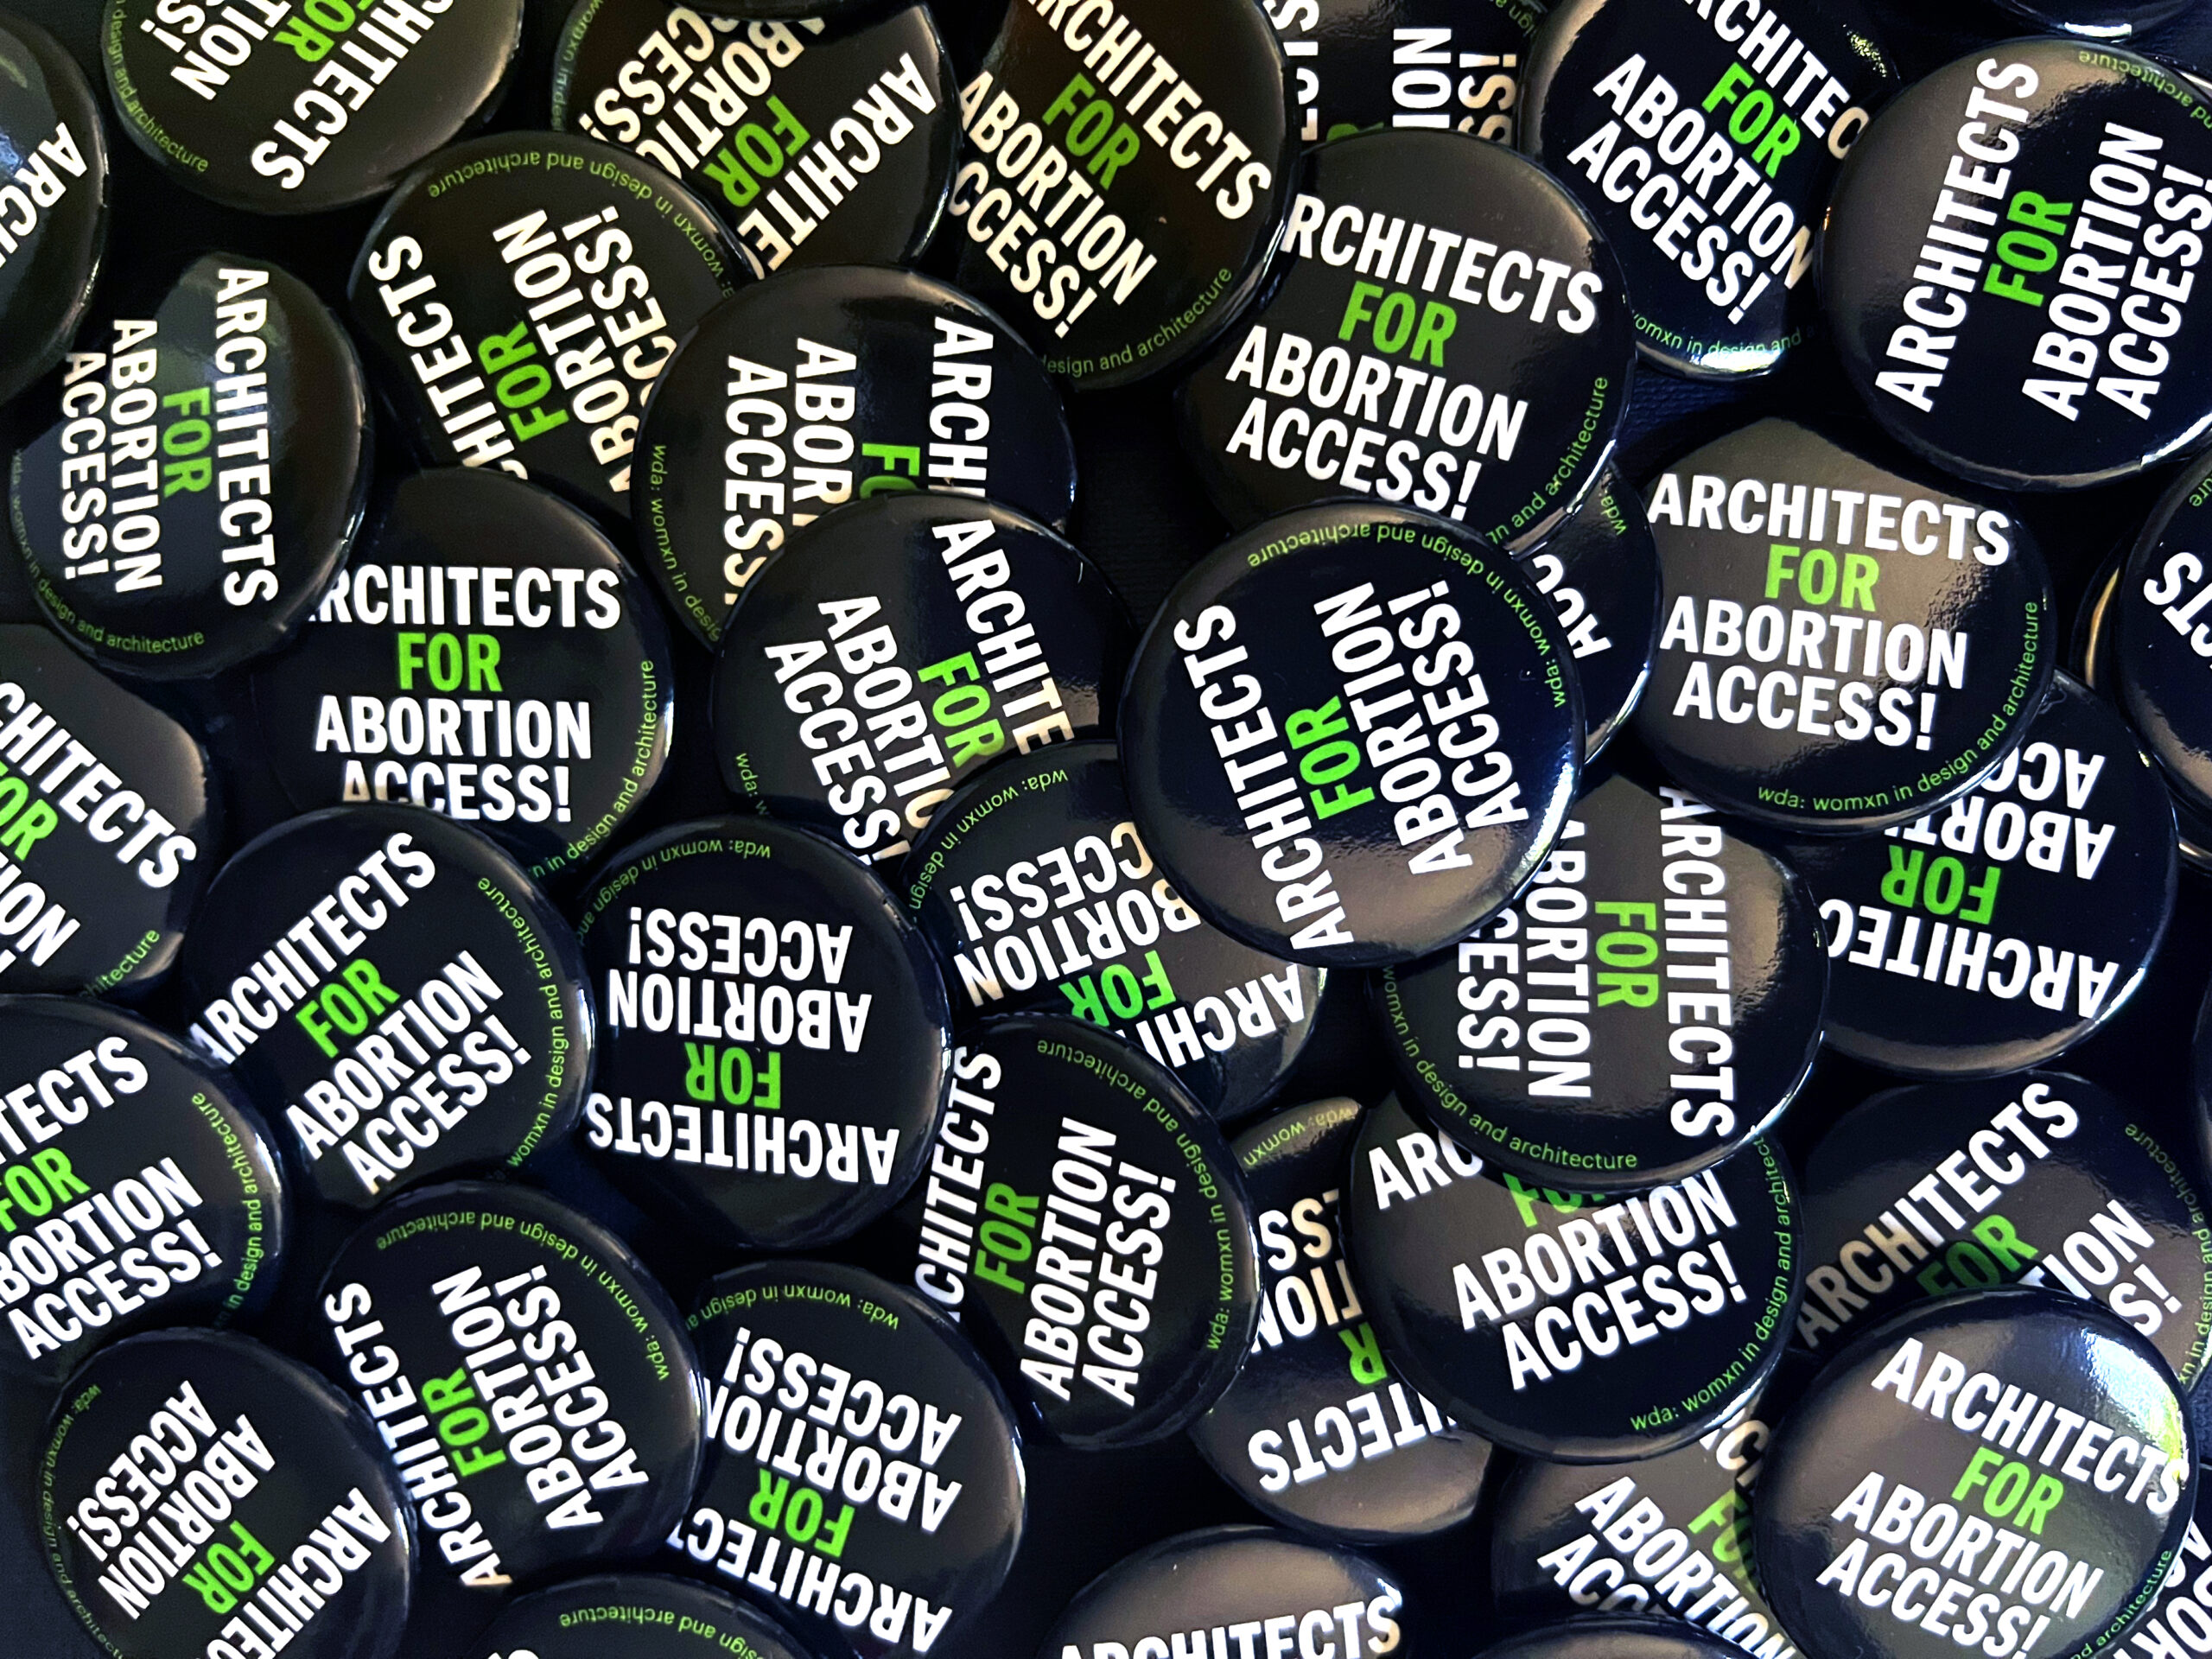 Buttons saying architects for abortion access.